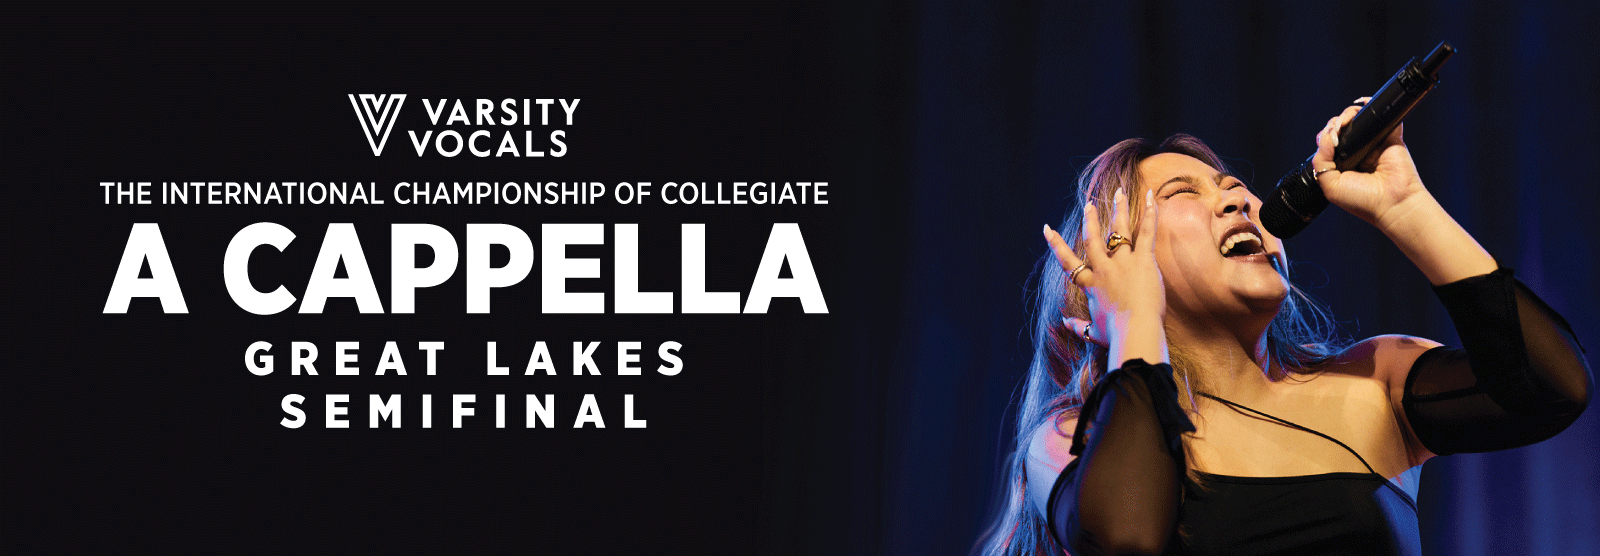 International Championship of Collegiate A Cappella Great Lakes